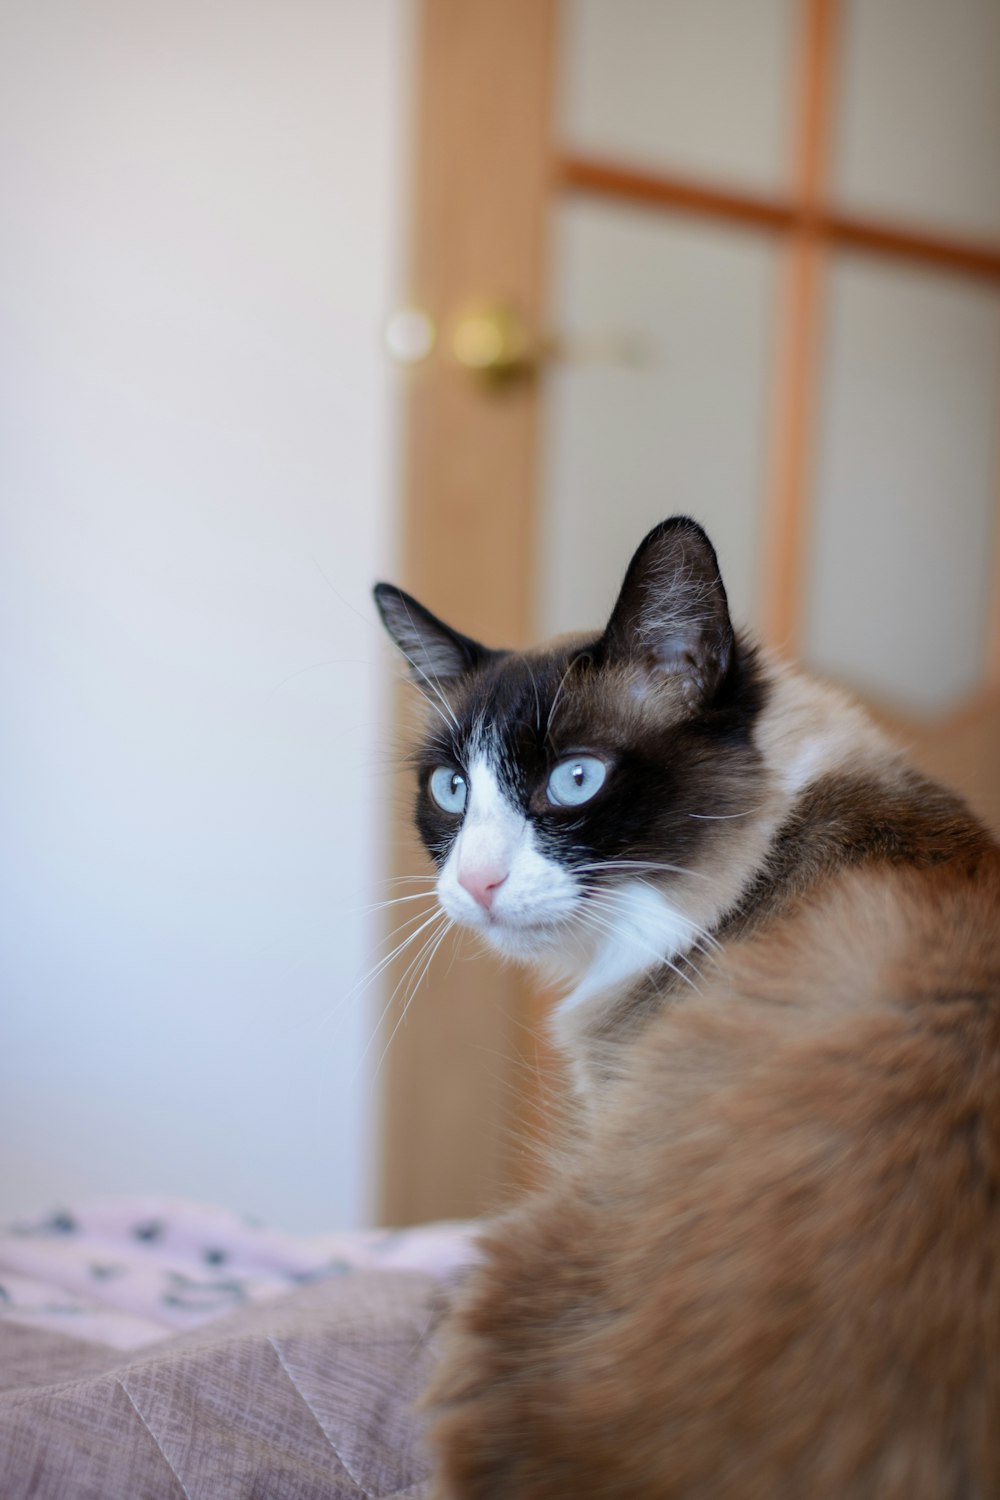 a cat with blue eyes sitting on a bed